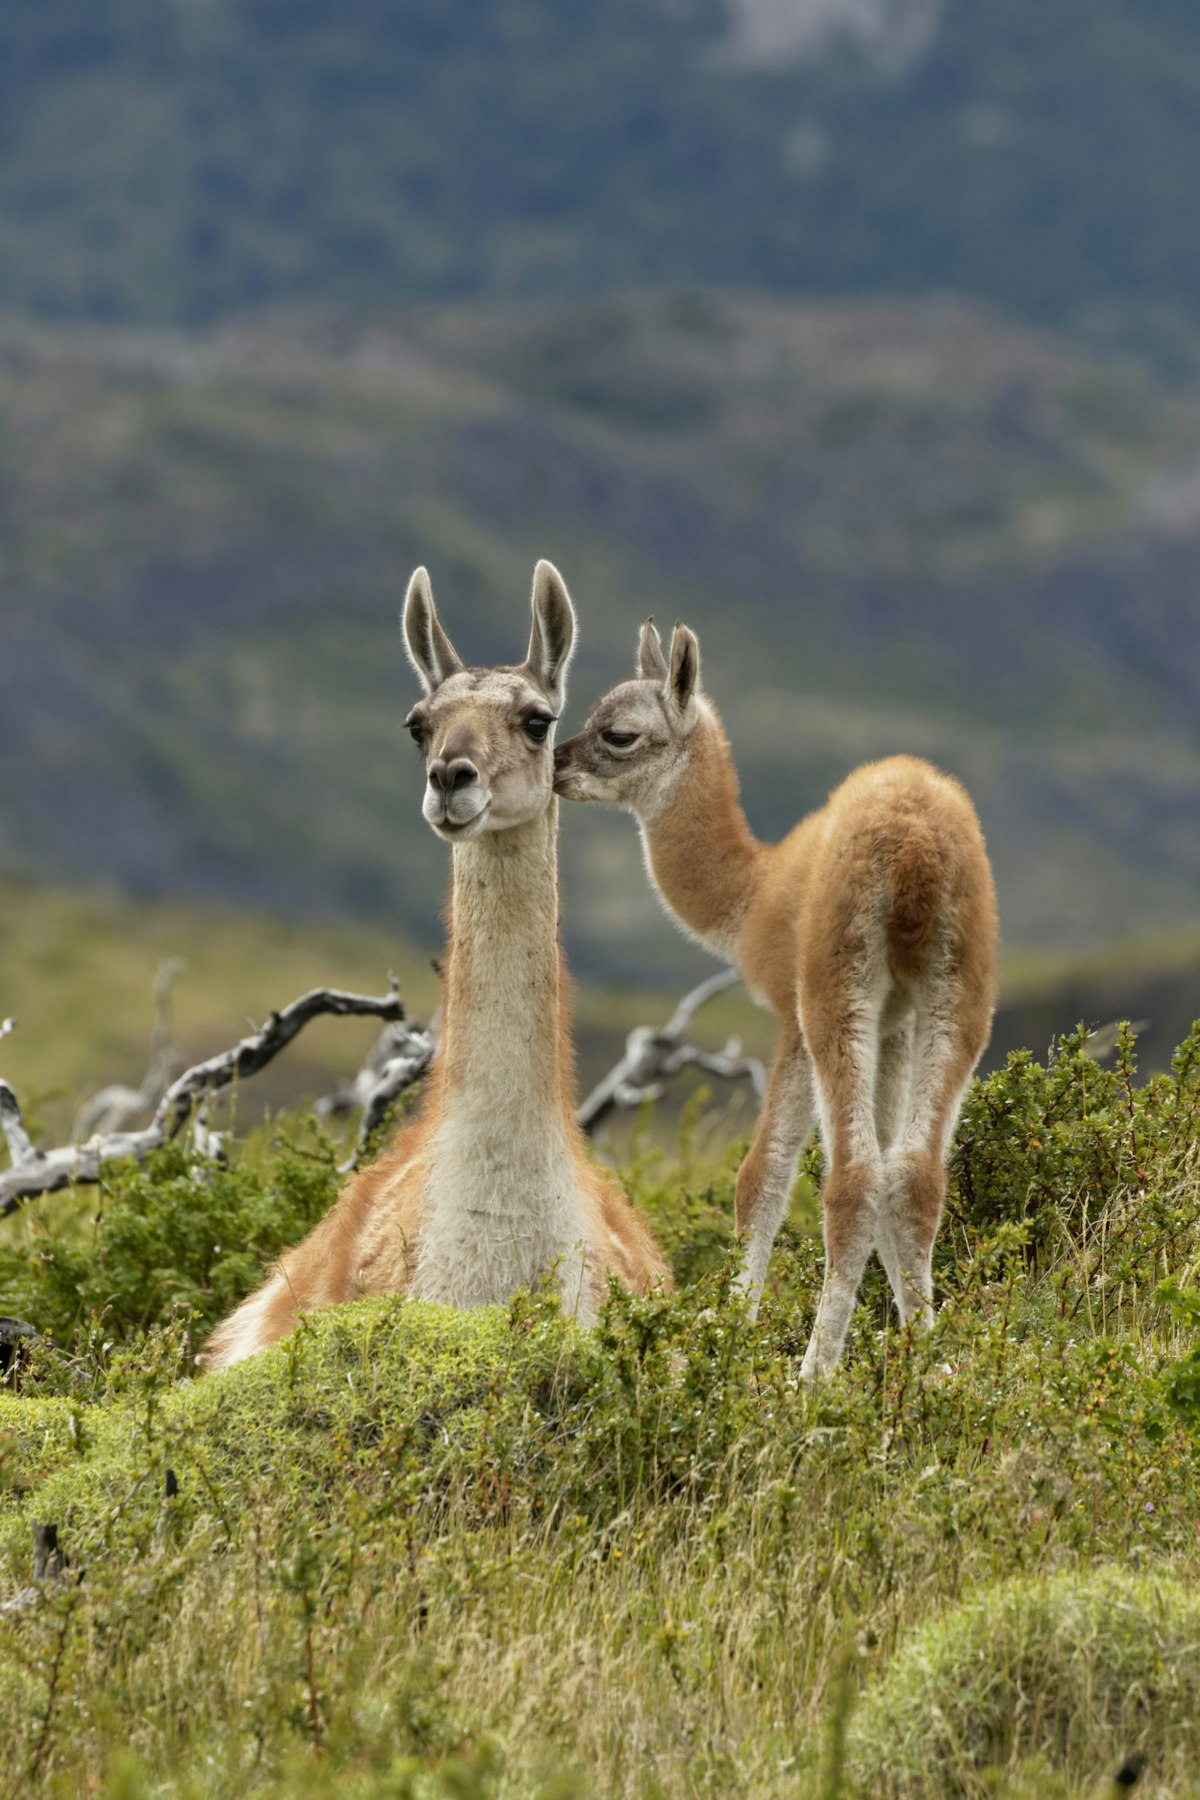 The guanaco (Lama guanicoe), a camelid native to South America, stands between 1.0 and 1.2 m at the shoulder and weighs 90 to 140 kg. Its color varies very little (unlike the domestic llama), ranging from a light brown to dark cinnamon and shading to white underneath. Guanacos have grey faces and small, straight ears. The name guanaco comes from the South American Quechua word huanaco (modern spelling: wanaku). Young guanacos are called chulengos.